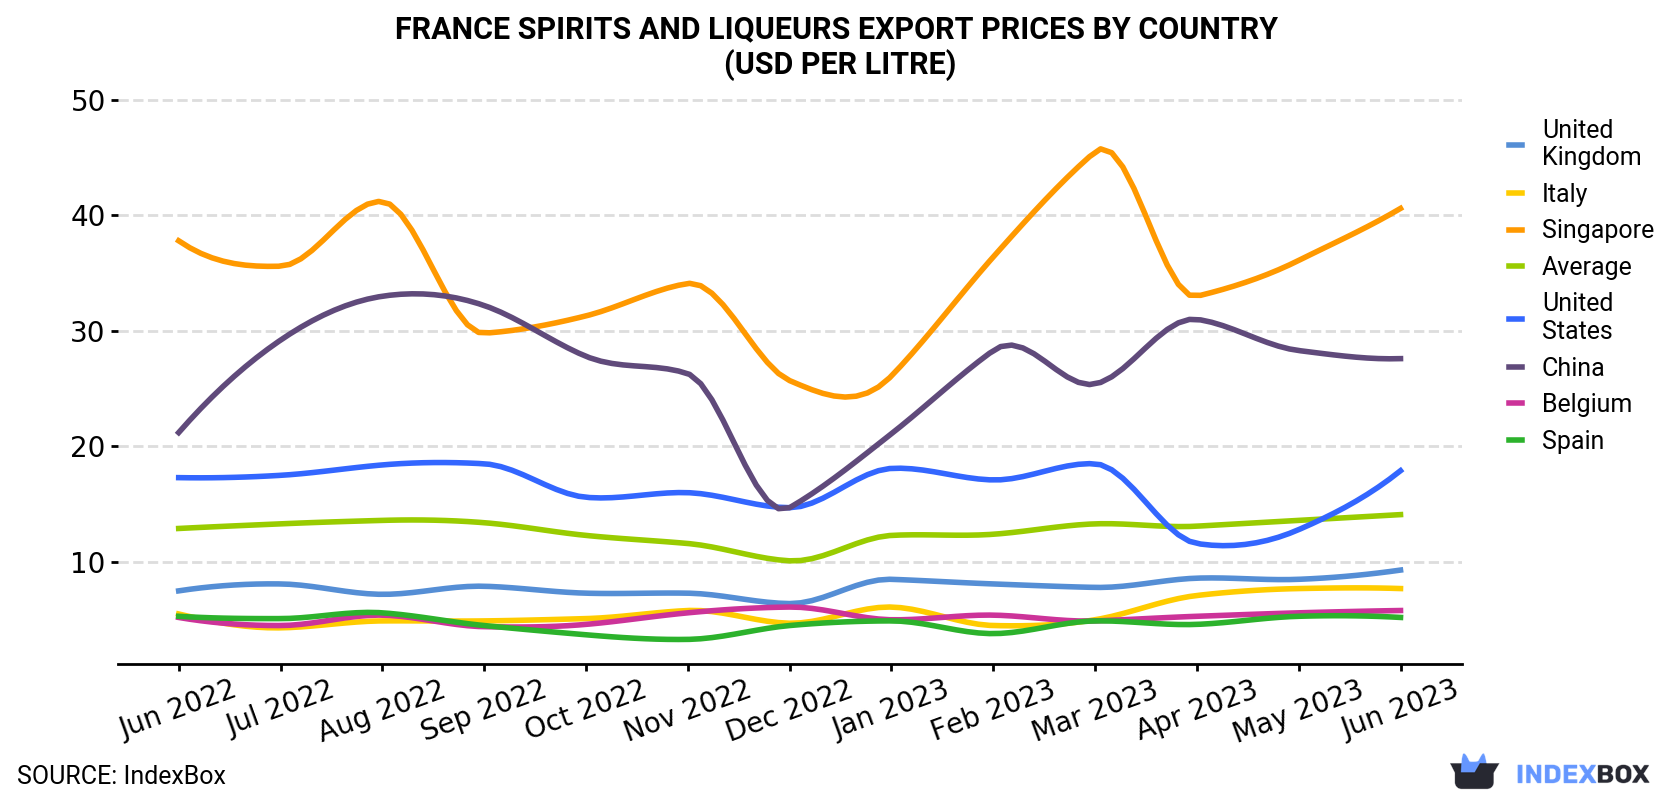 France Spirits And Liqueurs Export Prices By Country (USD Per Litre)